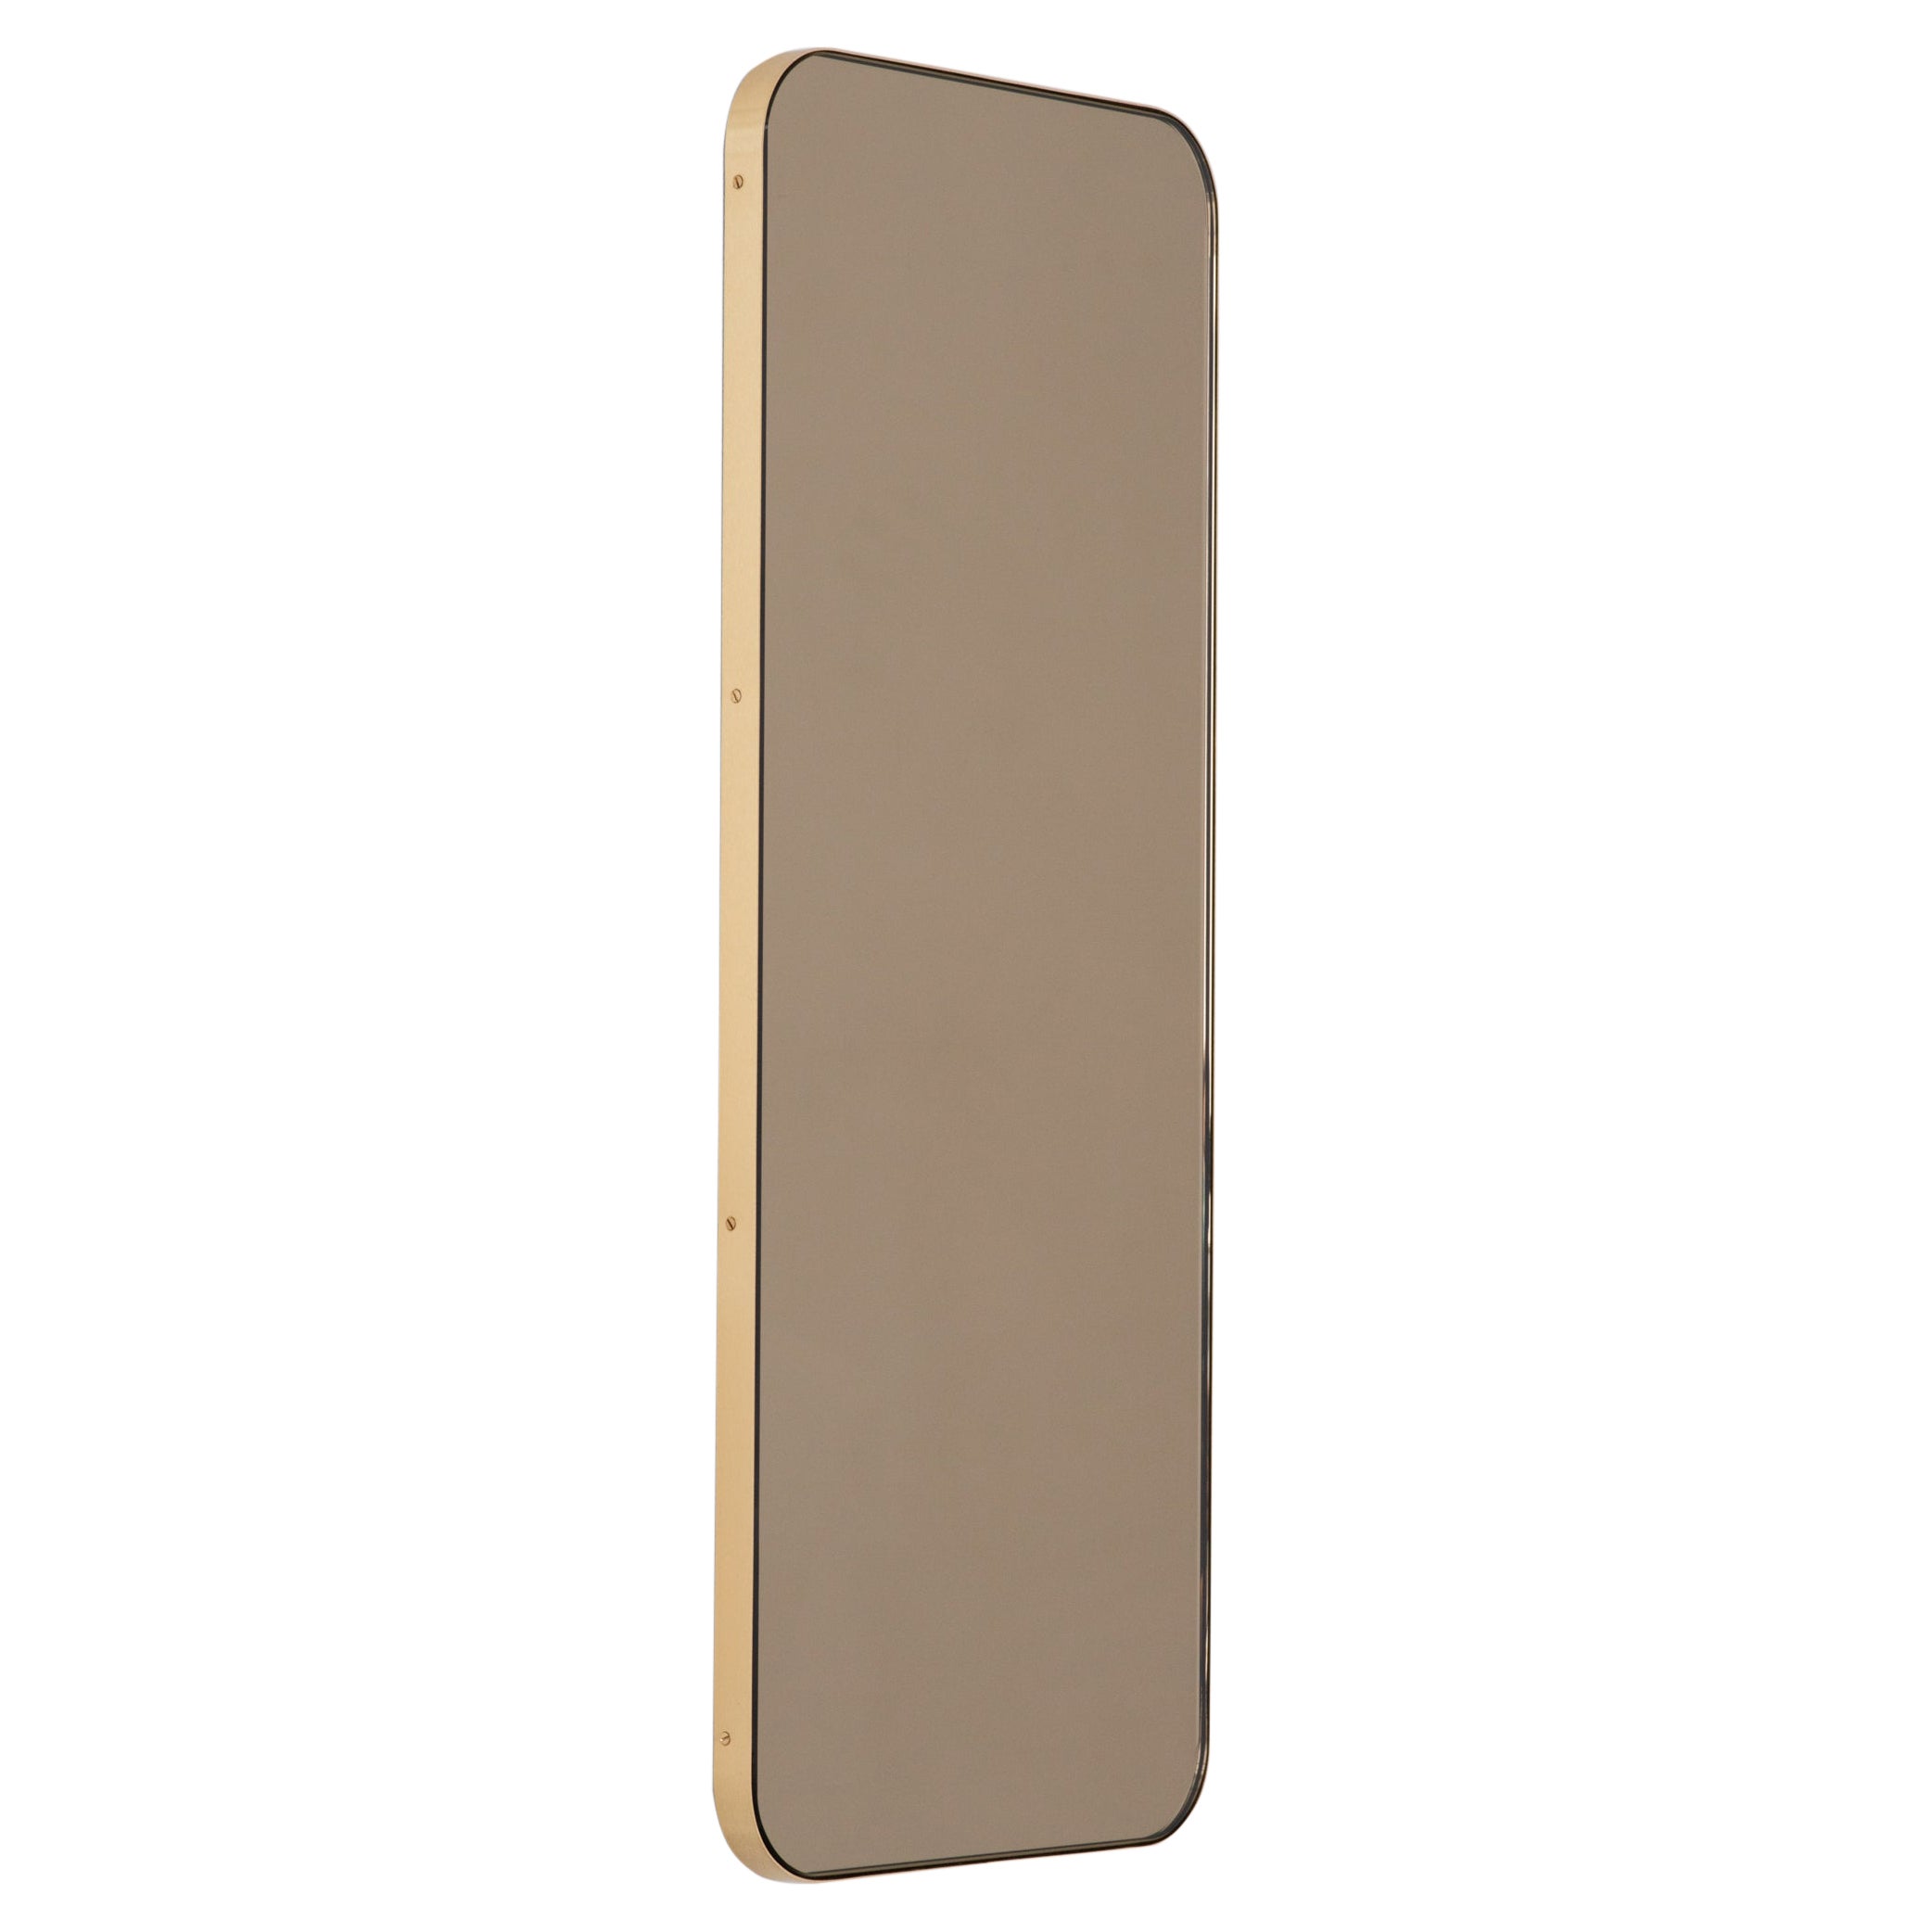 Quadris Bronze Tinted Rectangular Contemporary Mirror with a Brass Frame, Small For Sale